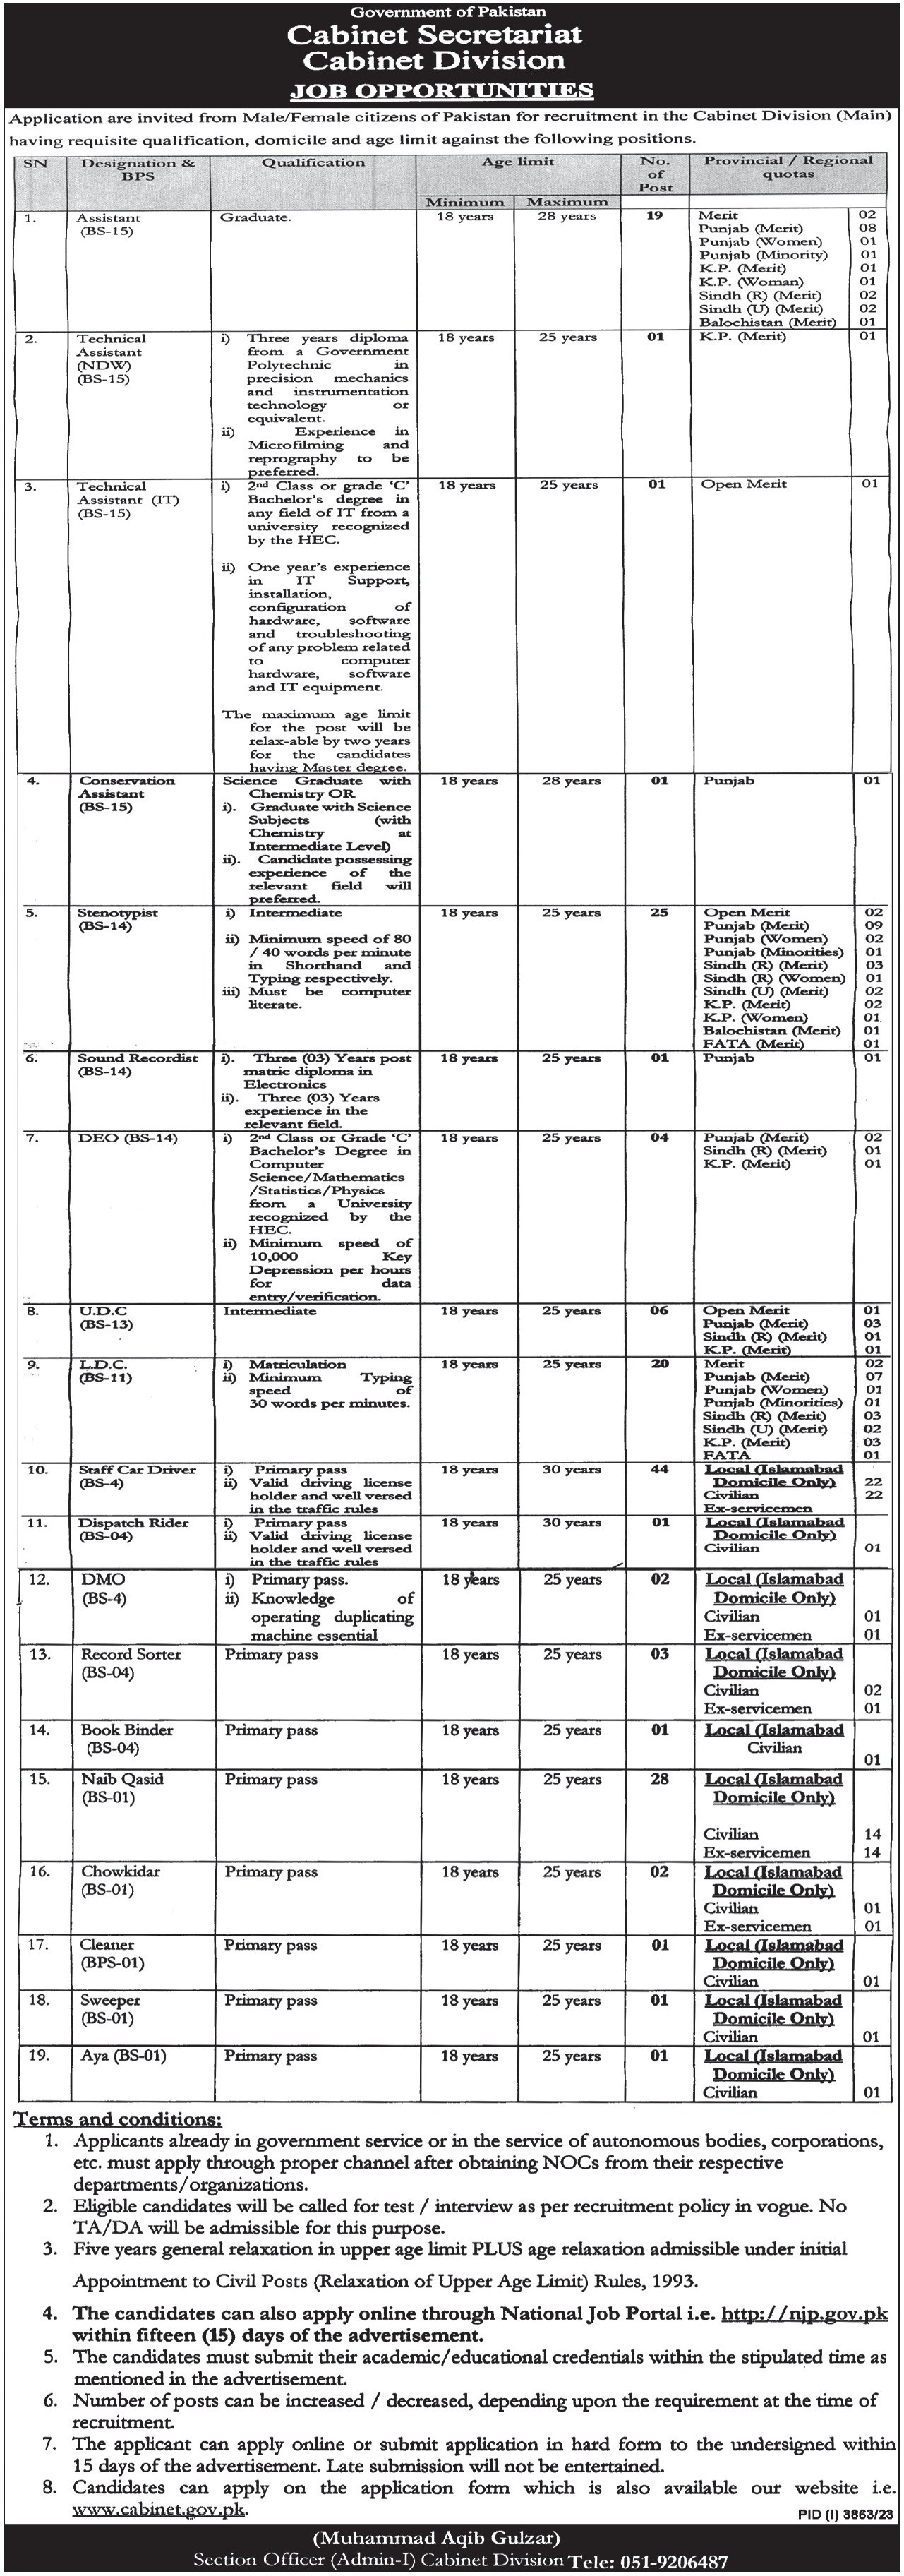 Jobs in Cabinet Division